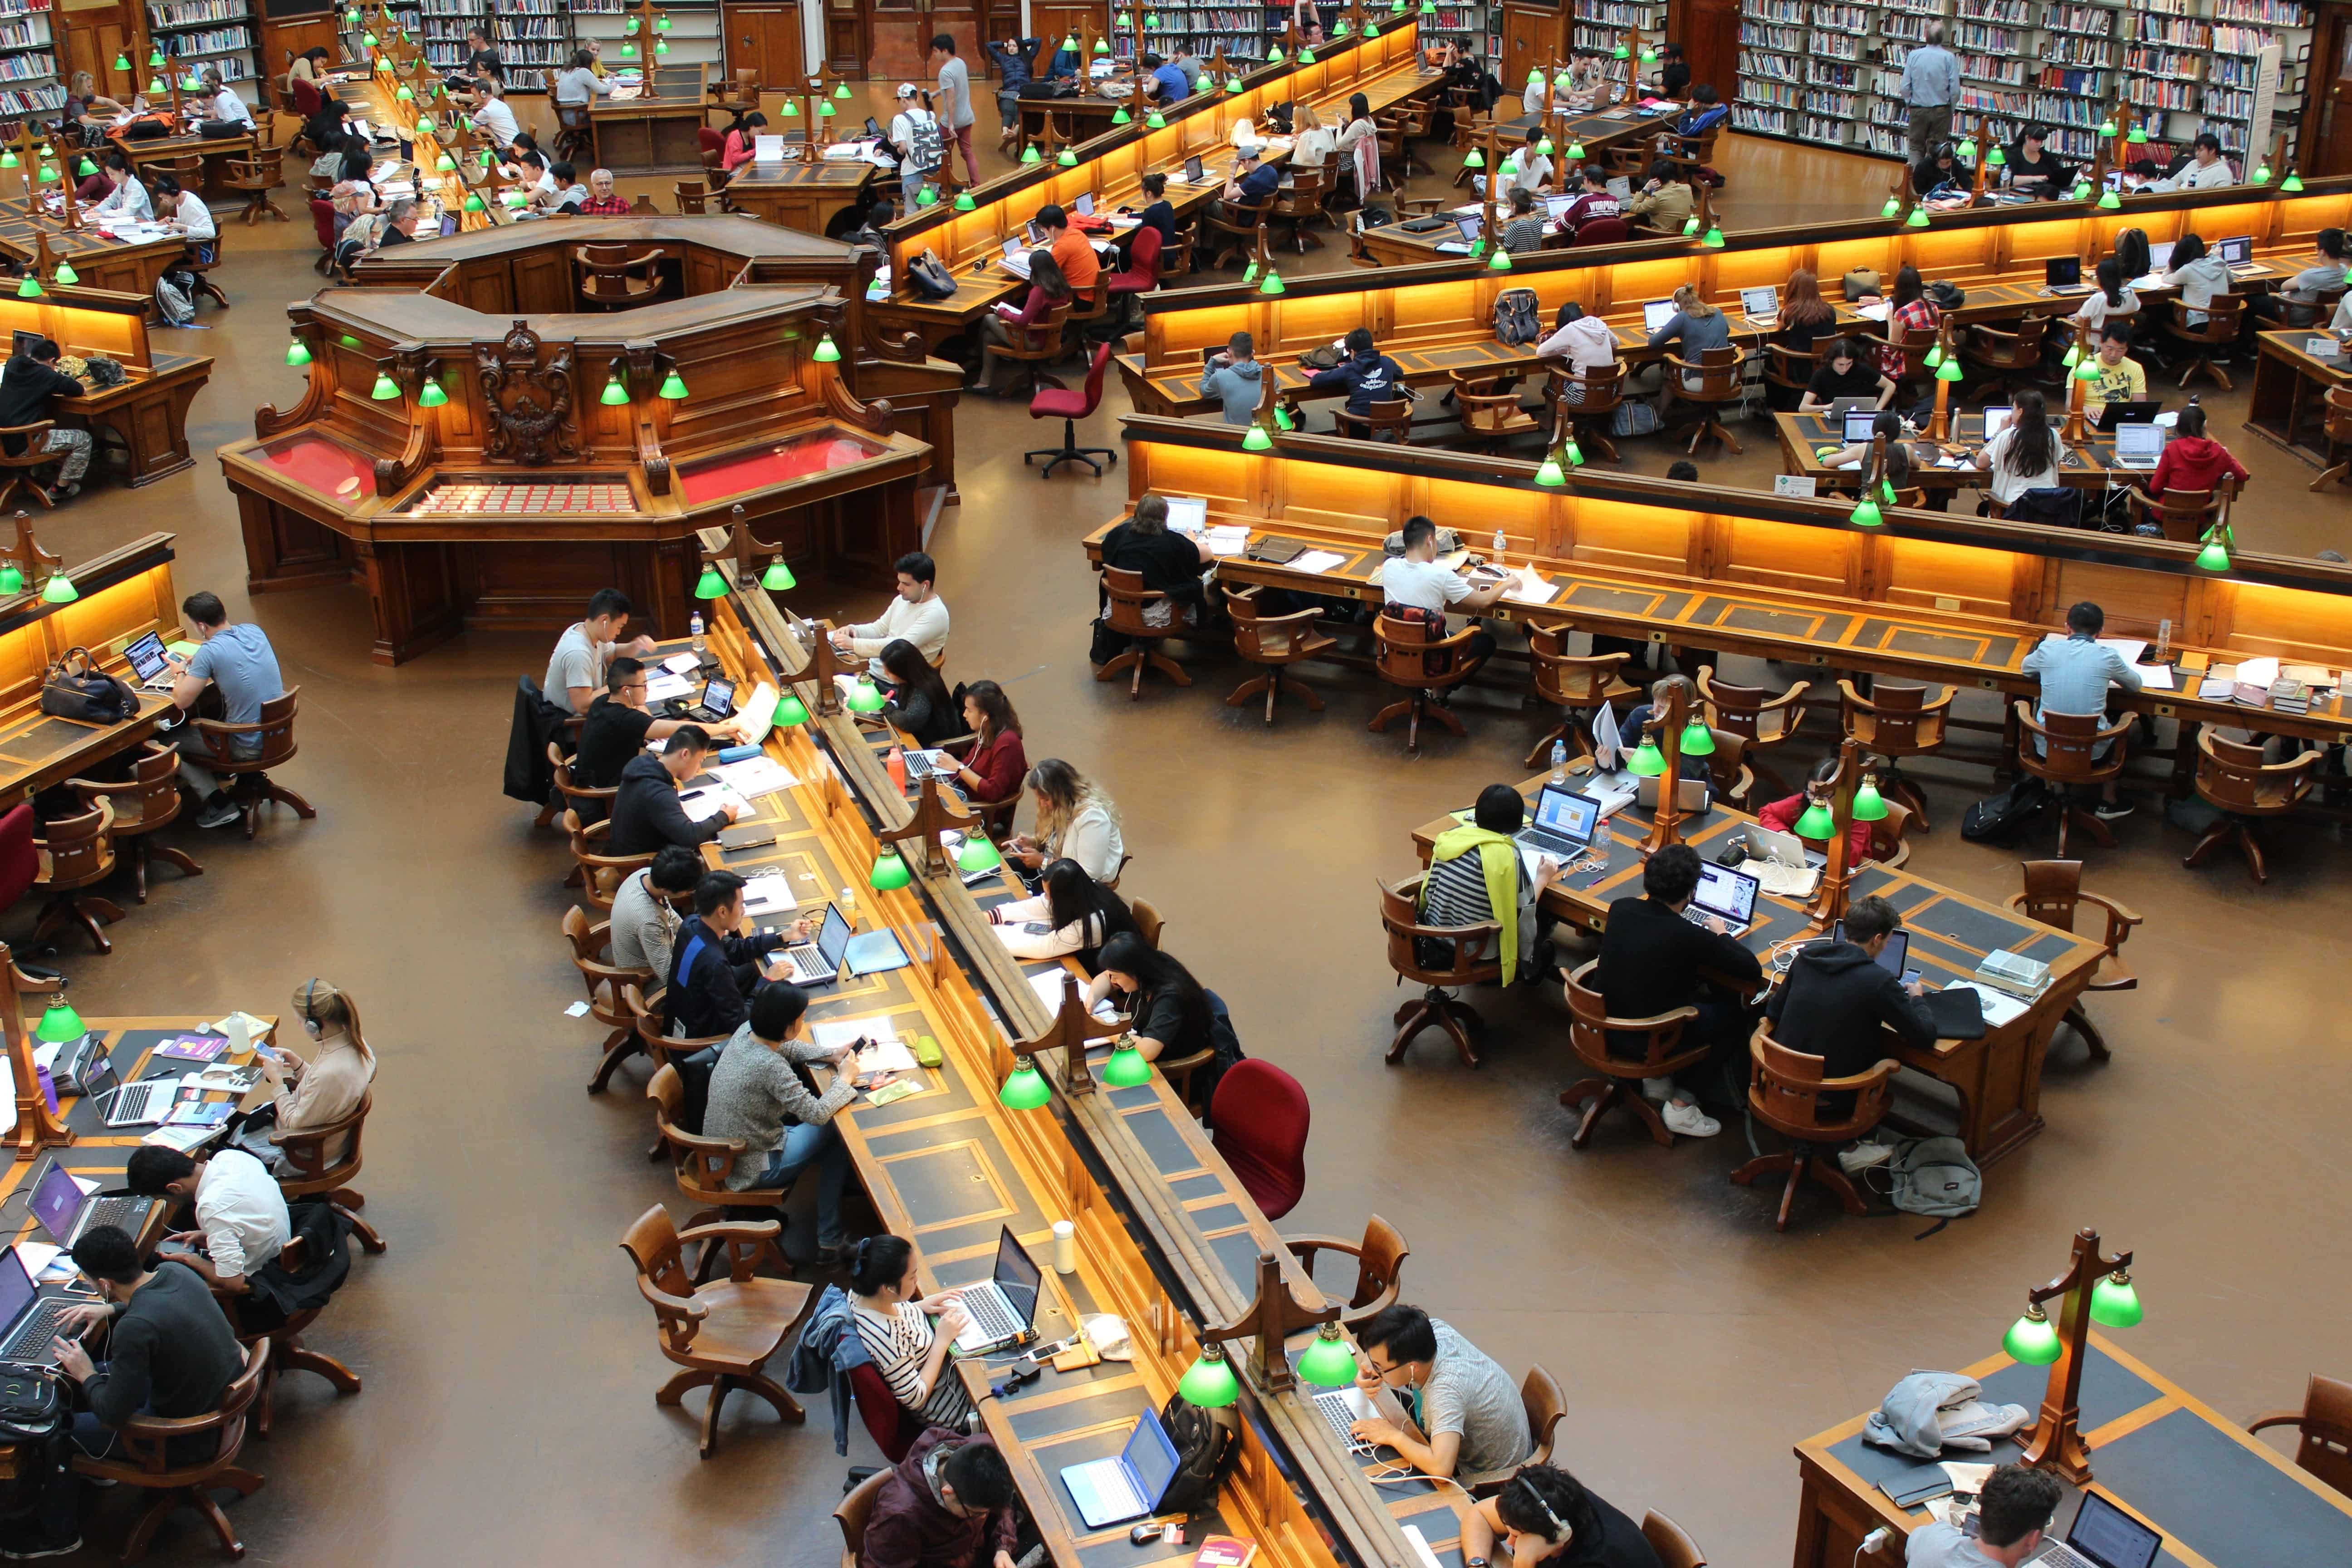 Students studying in a large university library